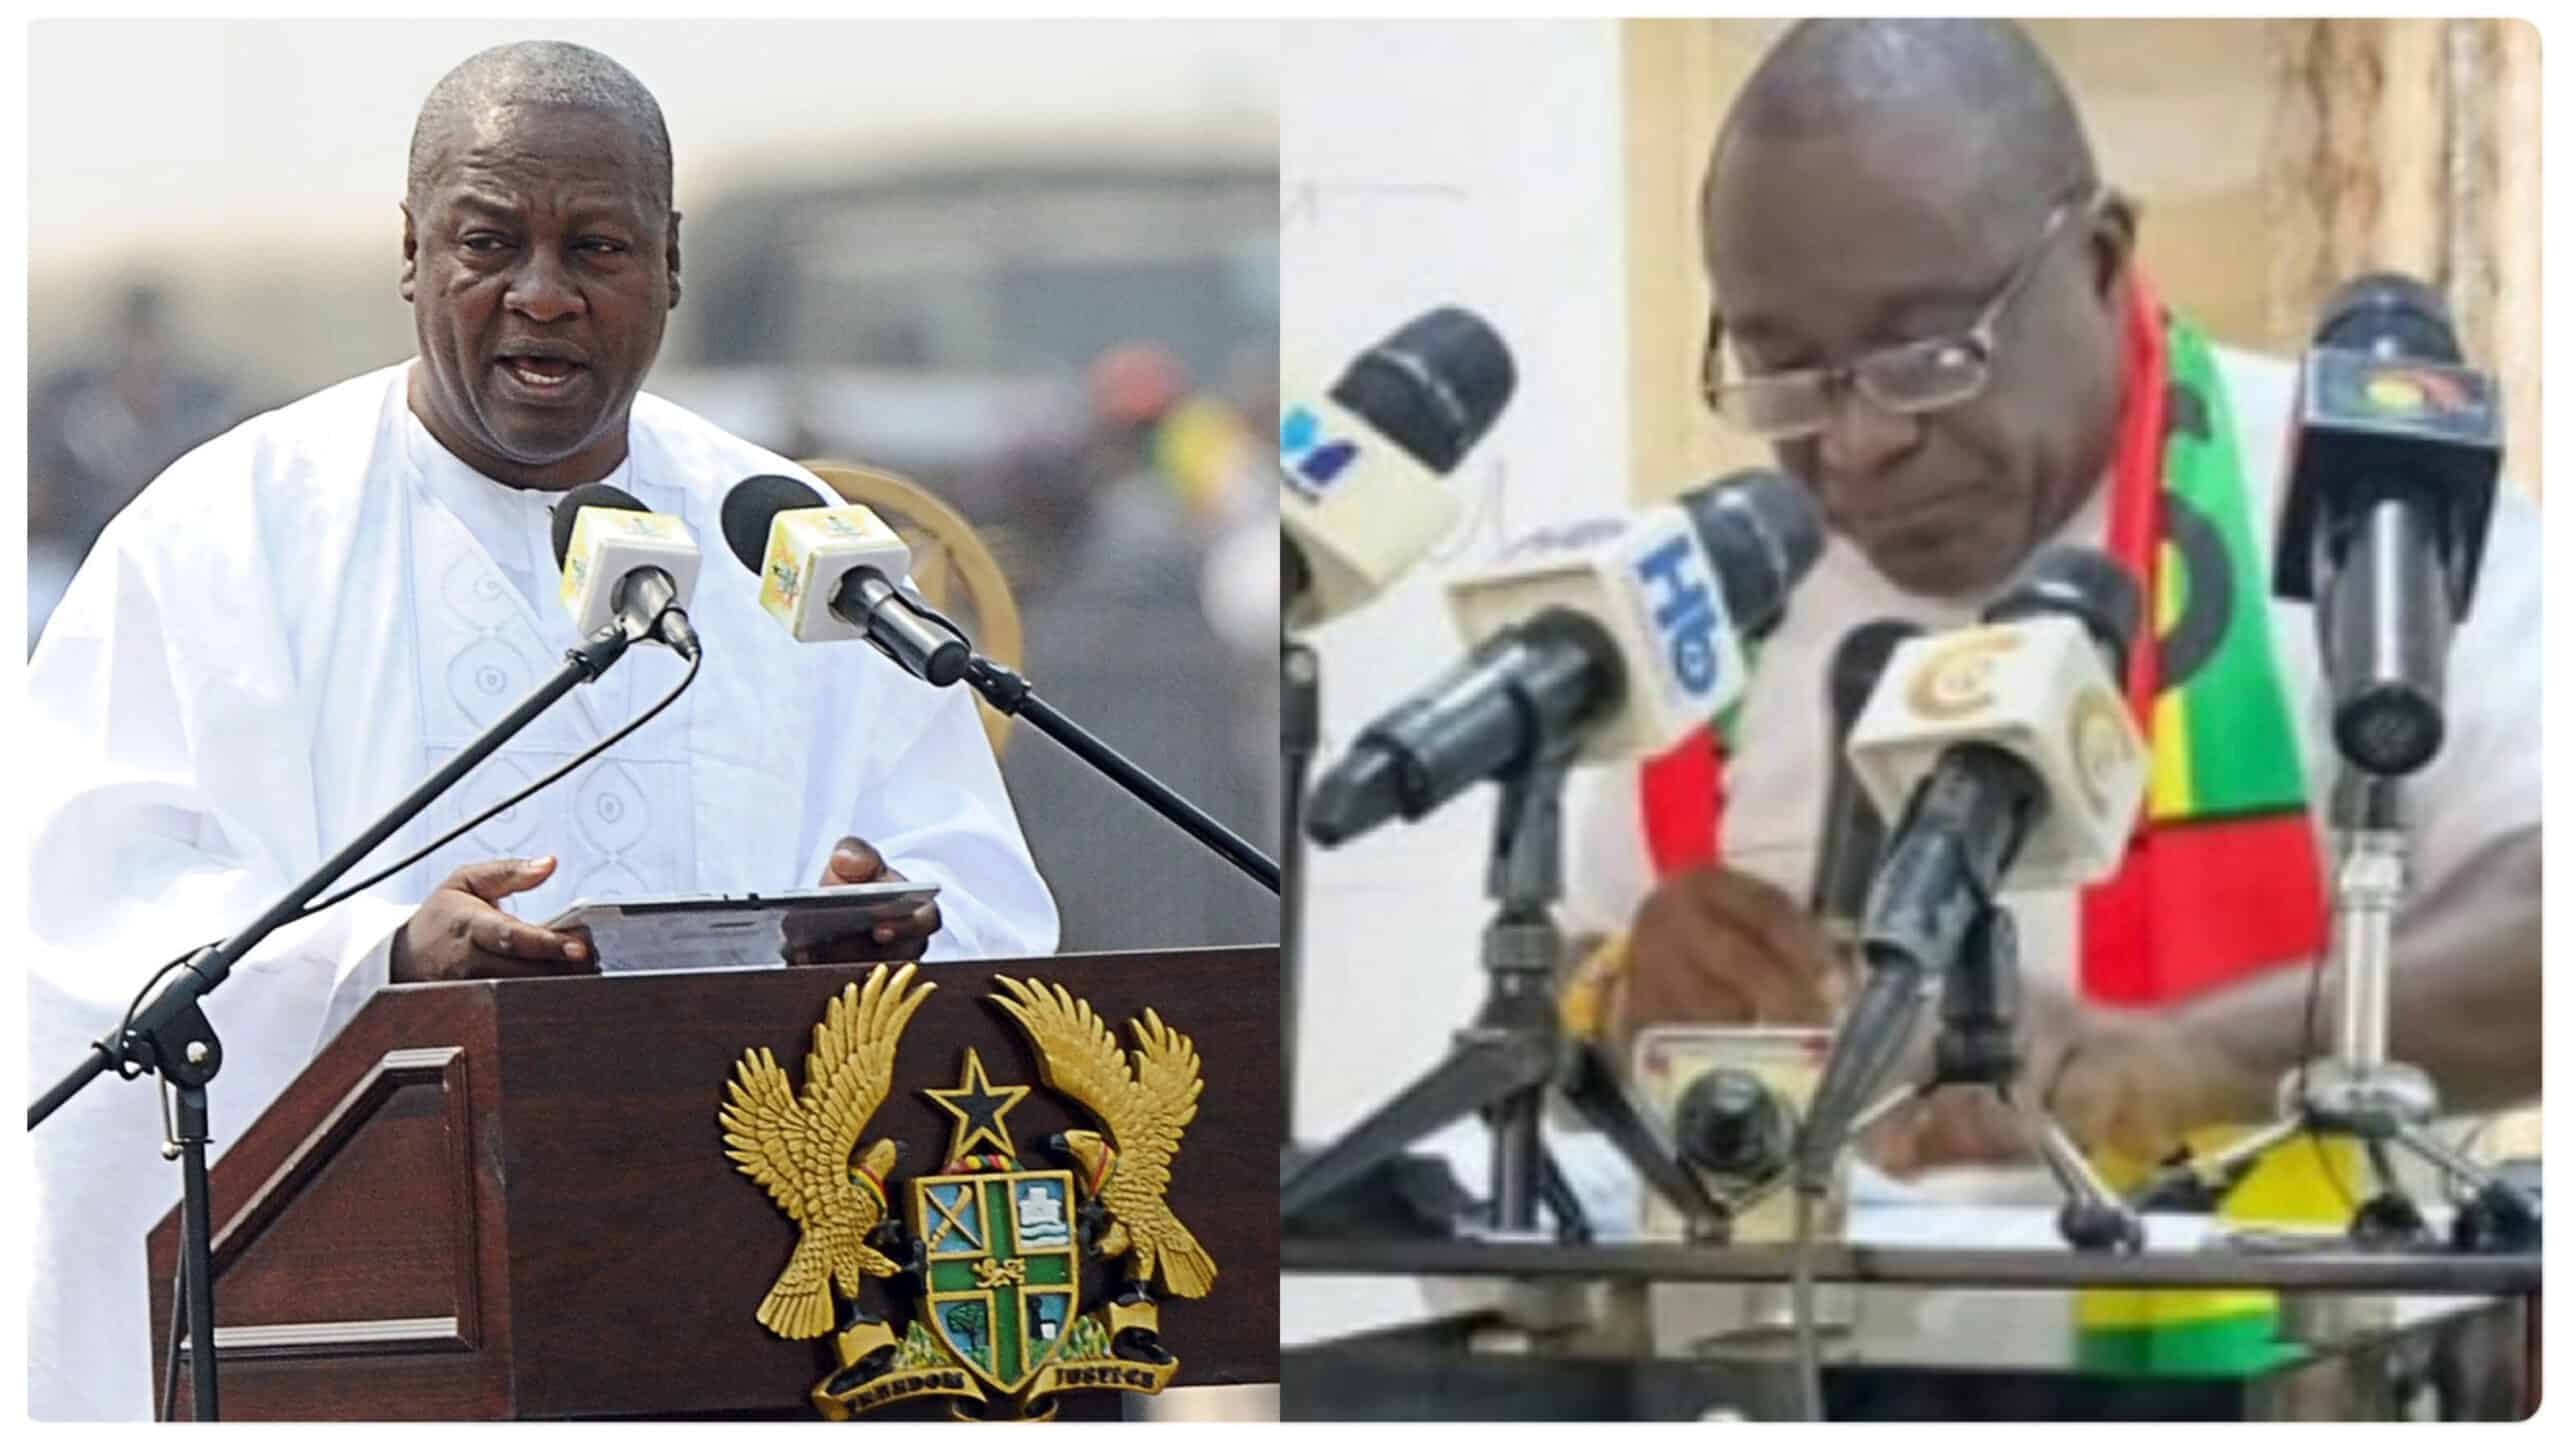 “Take my life if Mahama wins 2024 Elections” – Pastor bets with his life